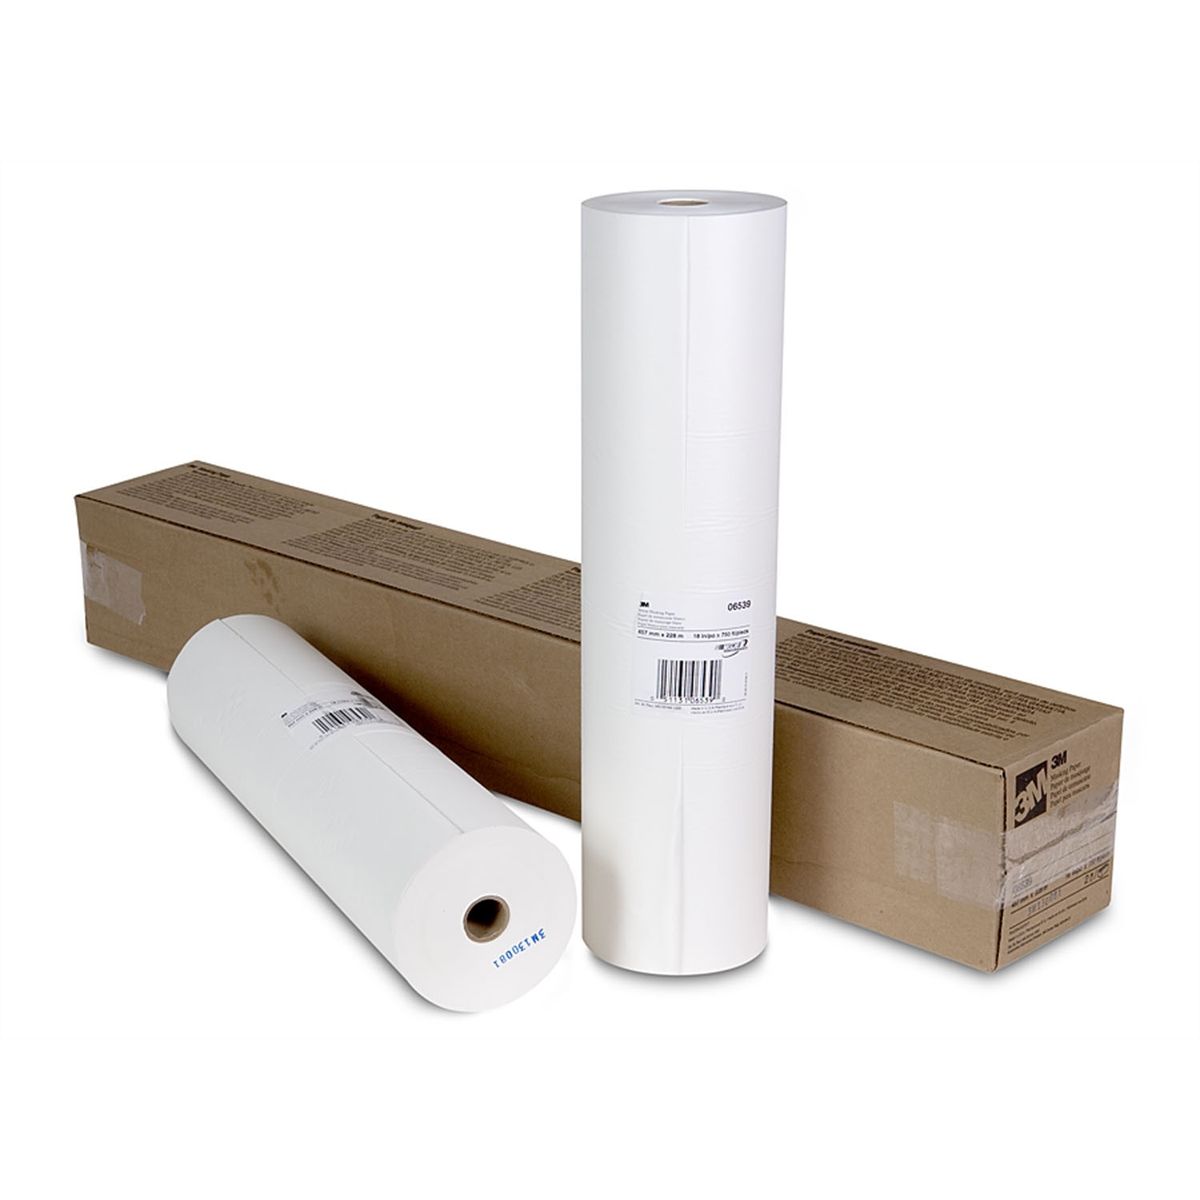 3M White Masking Paper - 18 In x 750 Ft - Single Roll